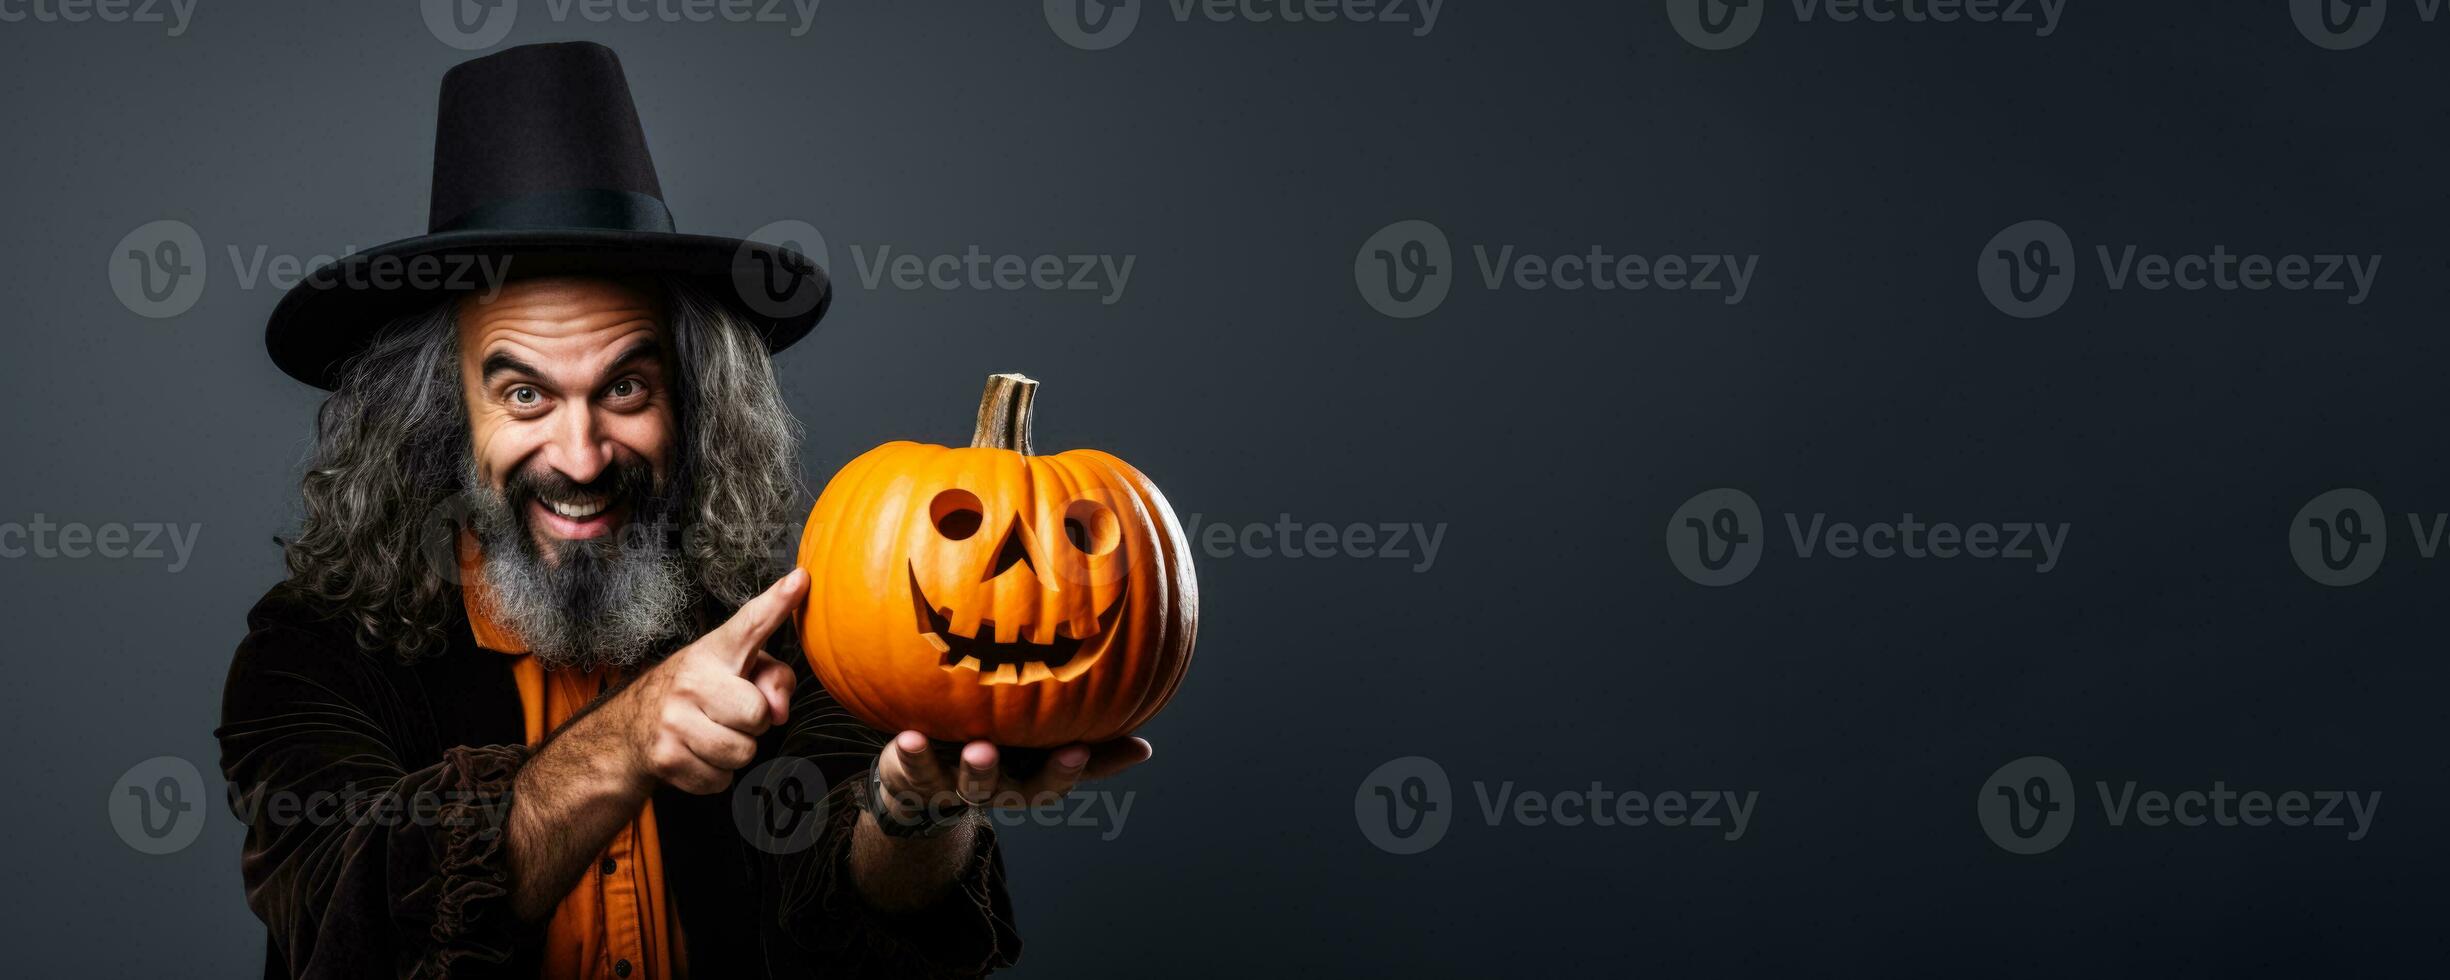 Archaeologist with a Halloween pumpkin on a solid background with empty space for text photo